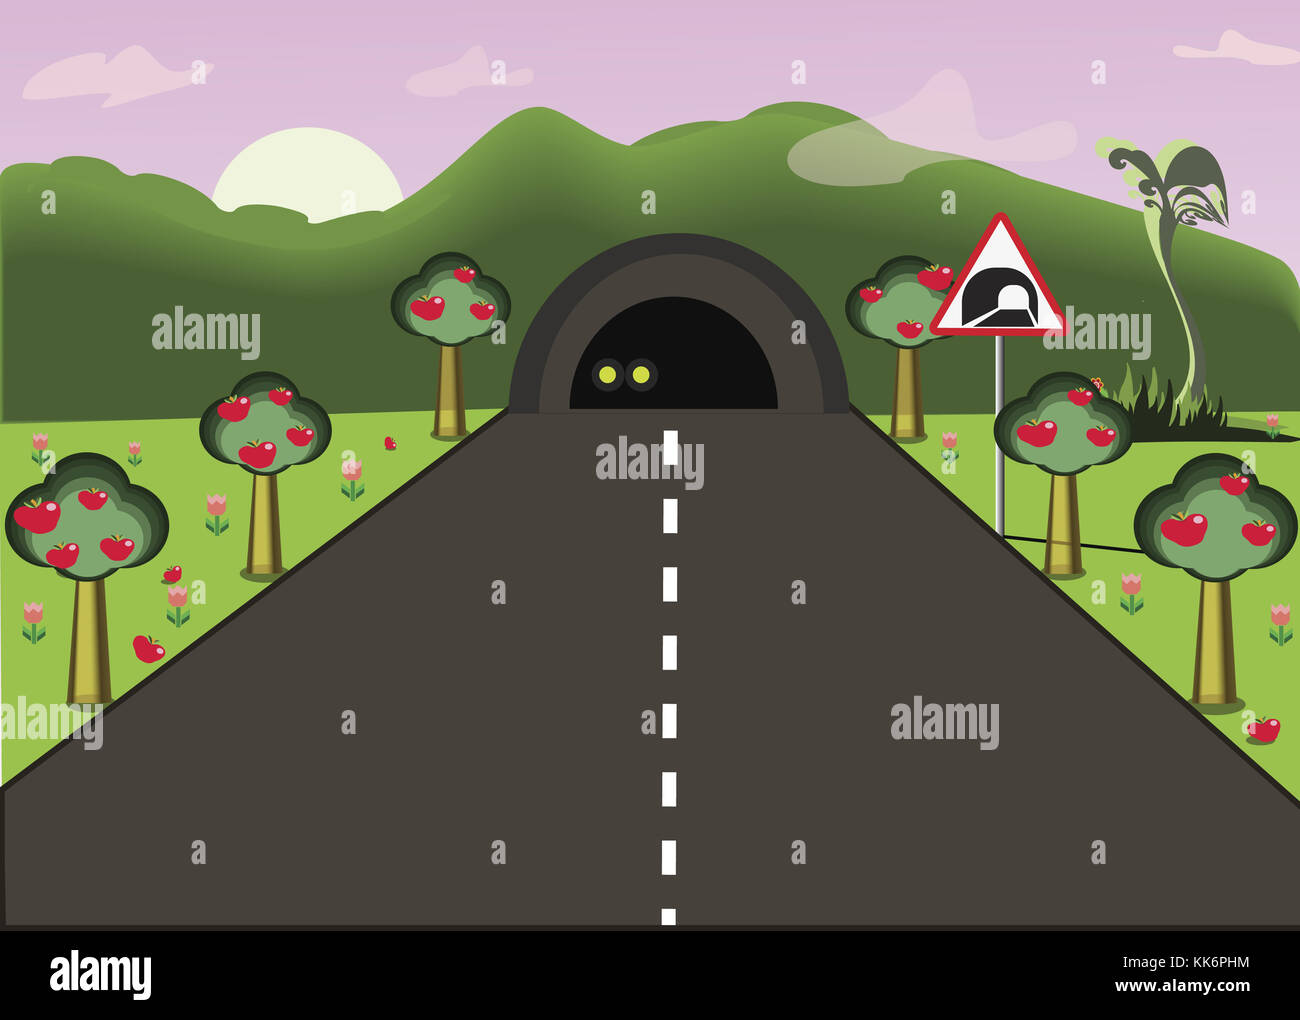 Car's headlamps shining in the tunnel. Road going through the tunnel. Flat vector illustration of cartoon road landscape. Stock Photo